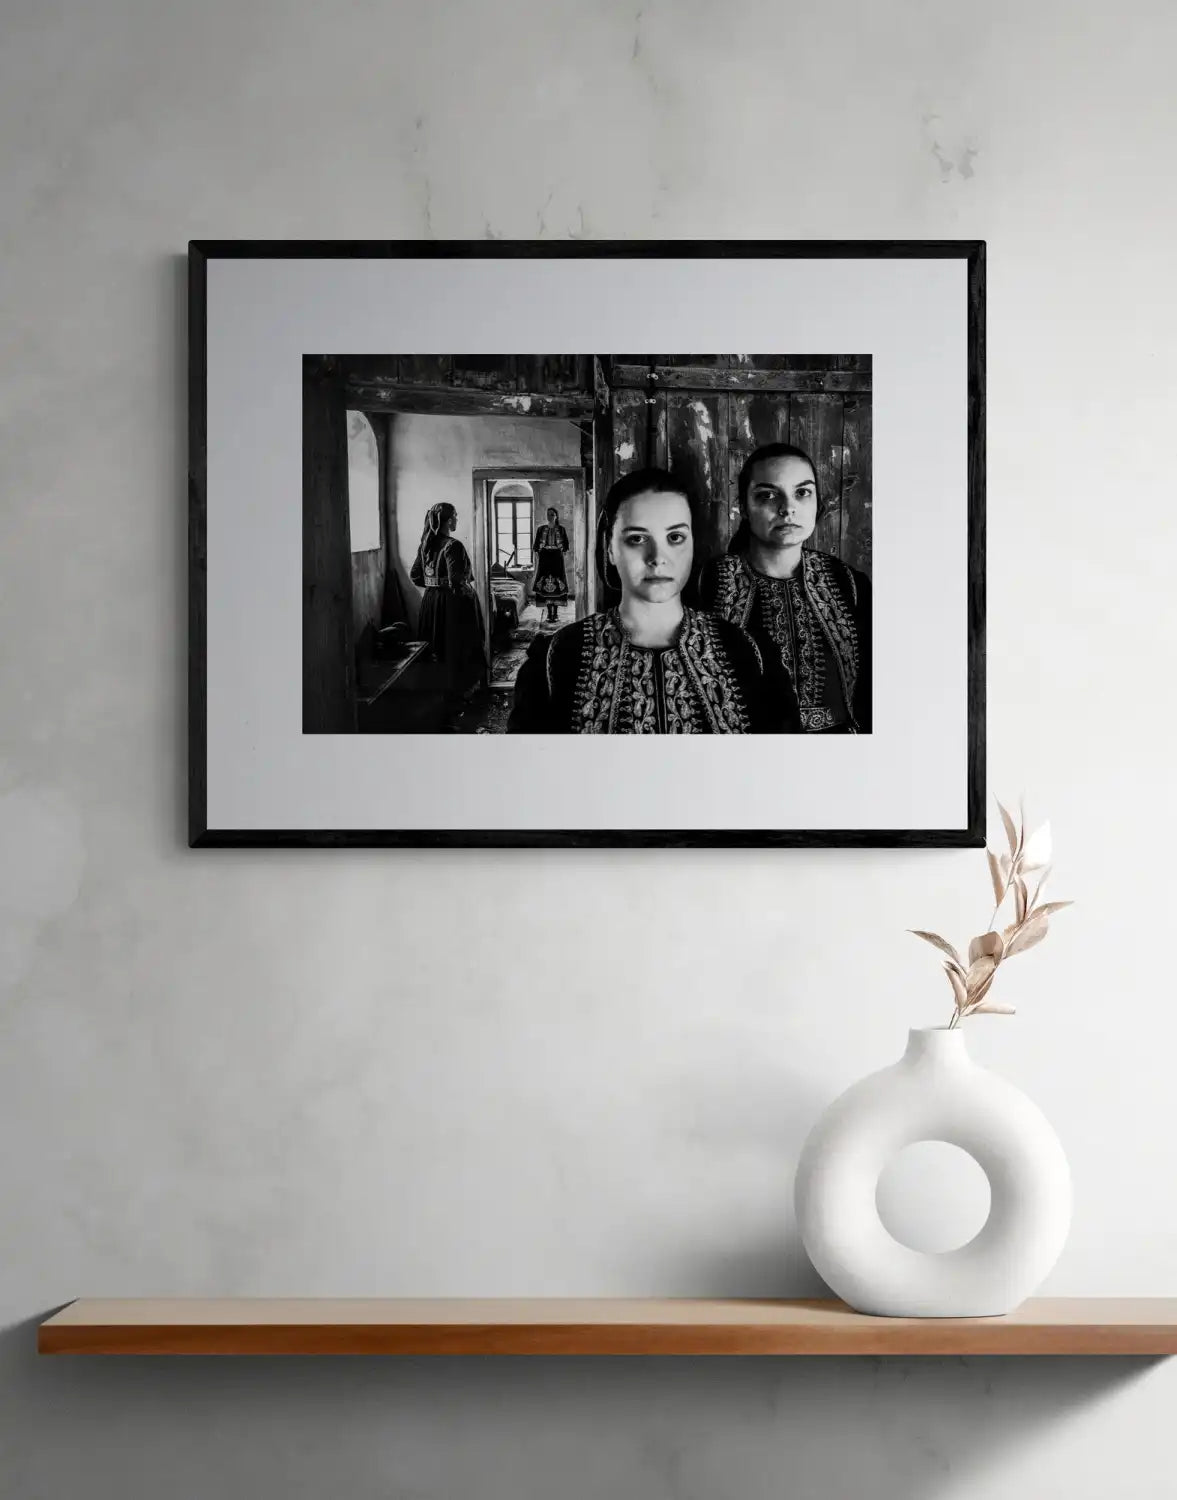 Filiates, Thesprotia, Epirus, Greece | In an Old House | Black-and-White Wall Art Photography - single print framed